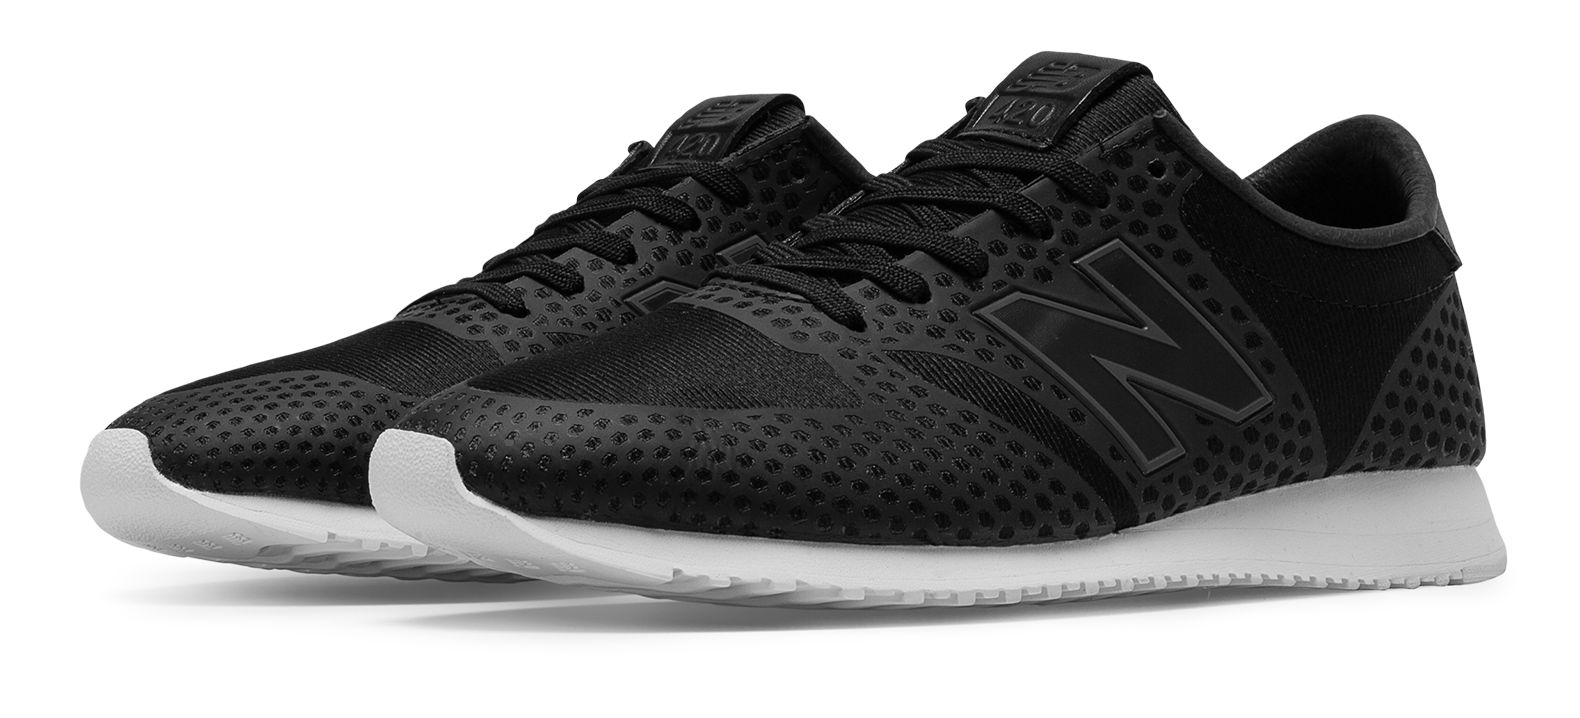 New Balance Synthetic 420 Re-engineered in Black - Lyst